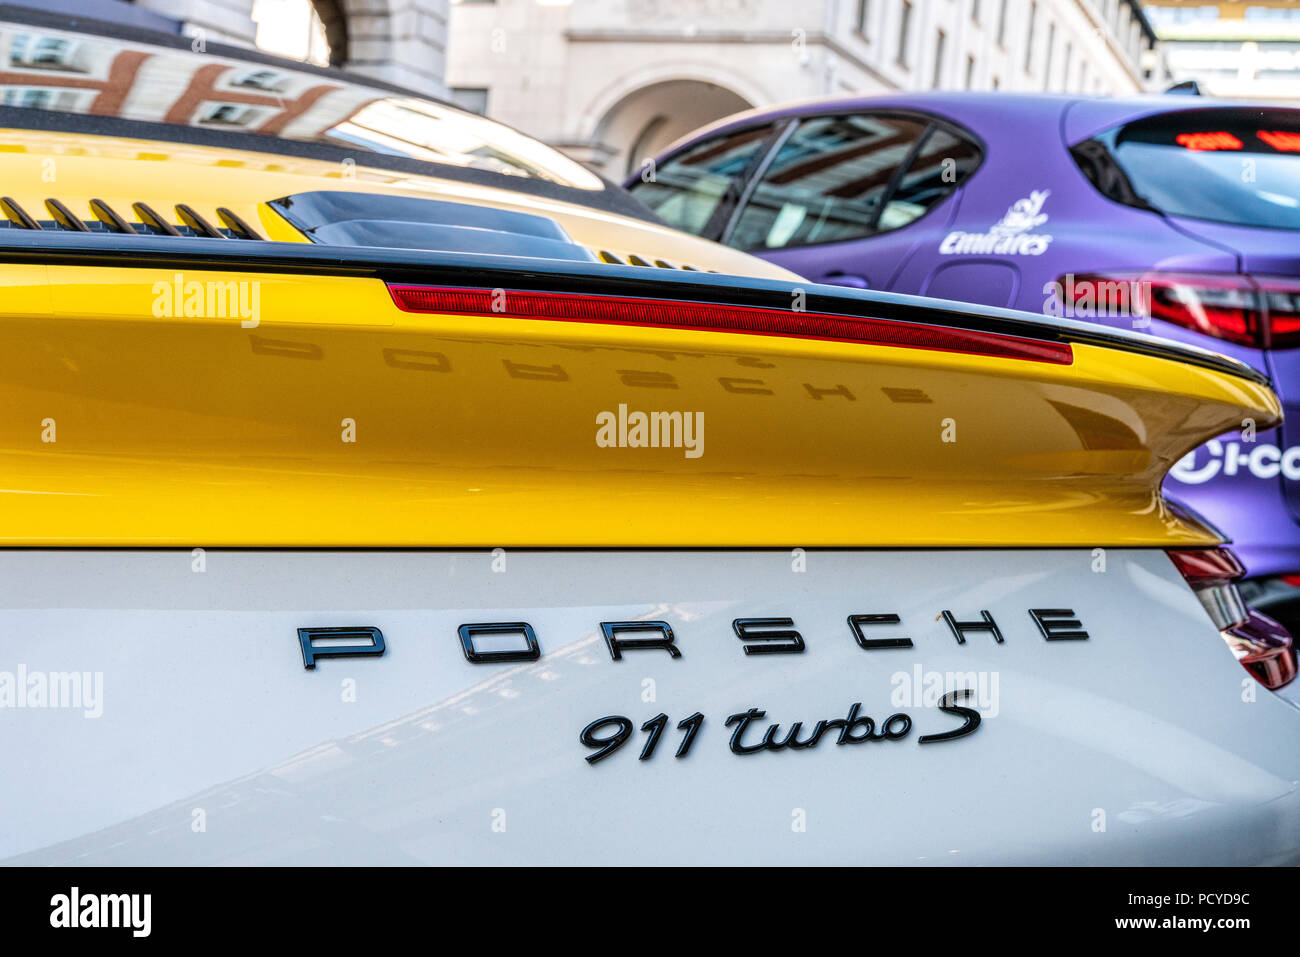 4 August 2018 - London, Engalnd. Supercar Porsche 911 Turbo S displayed at Covent Garden, London for the Gumball 3000 event. Stock Photo